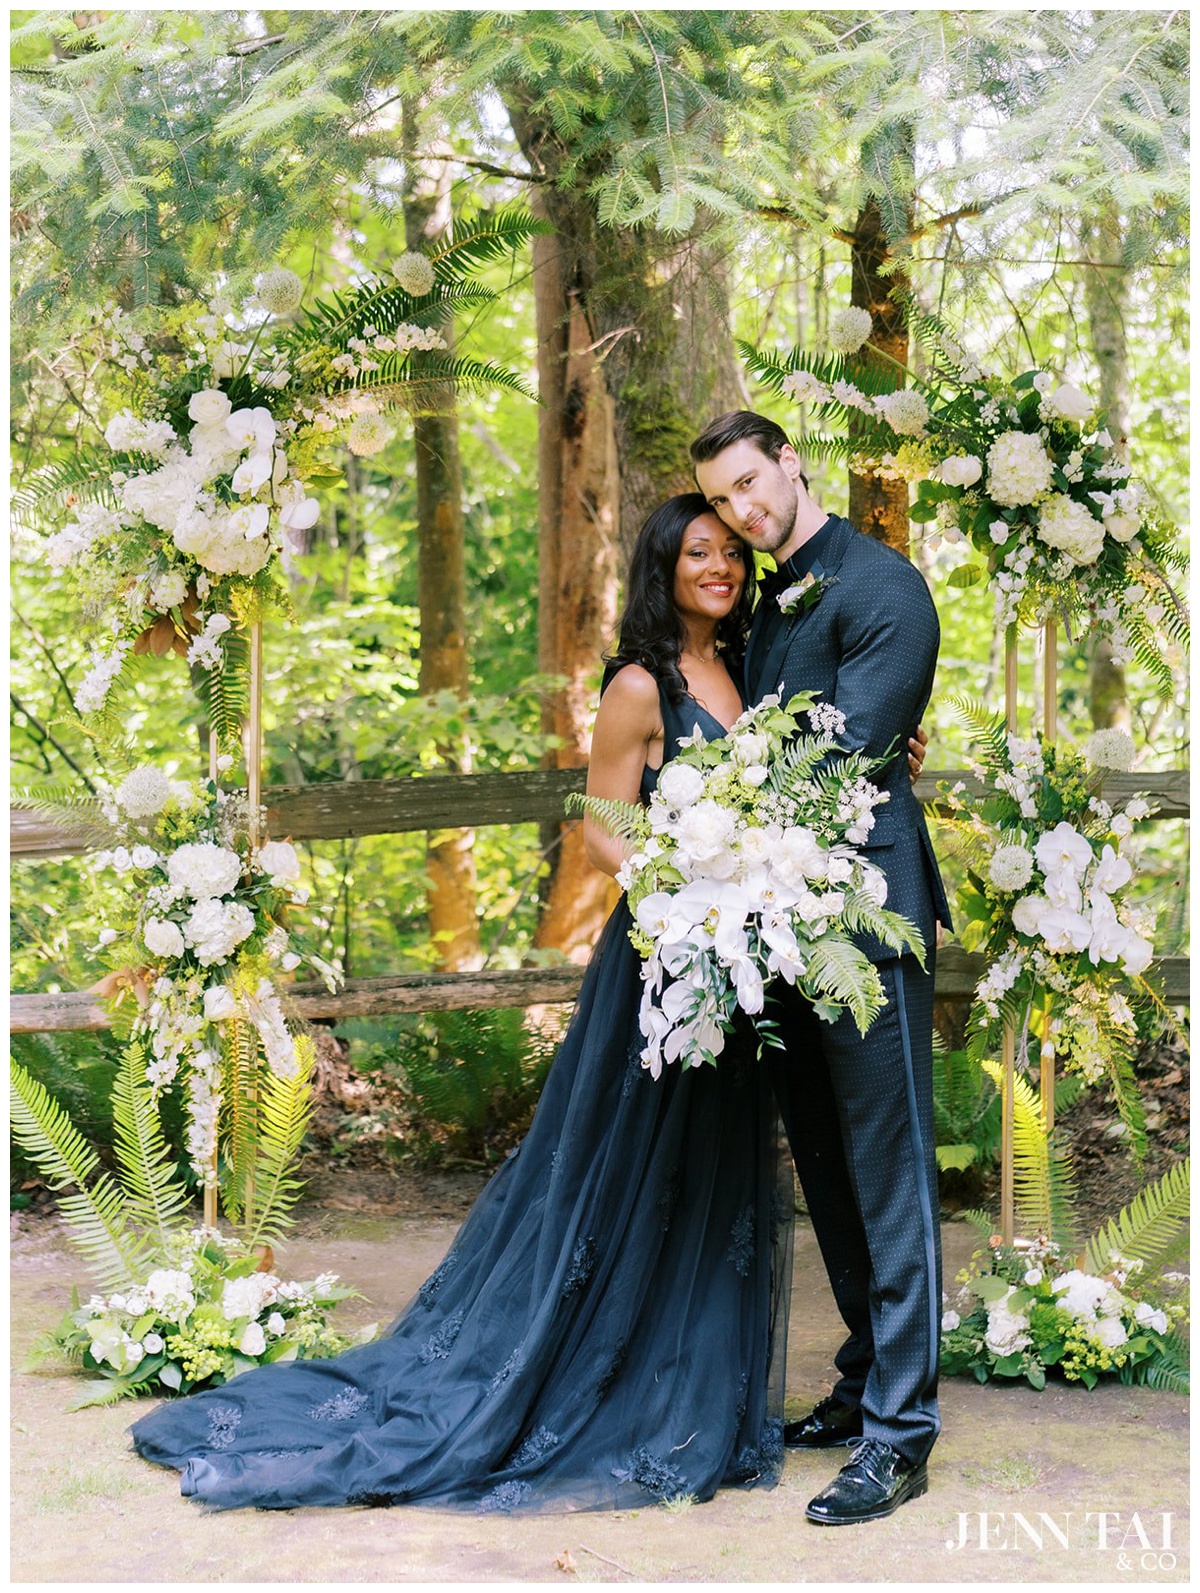 Stylish bride and groom in black at The Lodge at St. Edwards Park - Pink Blossom Events